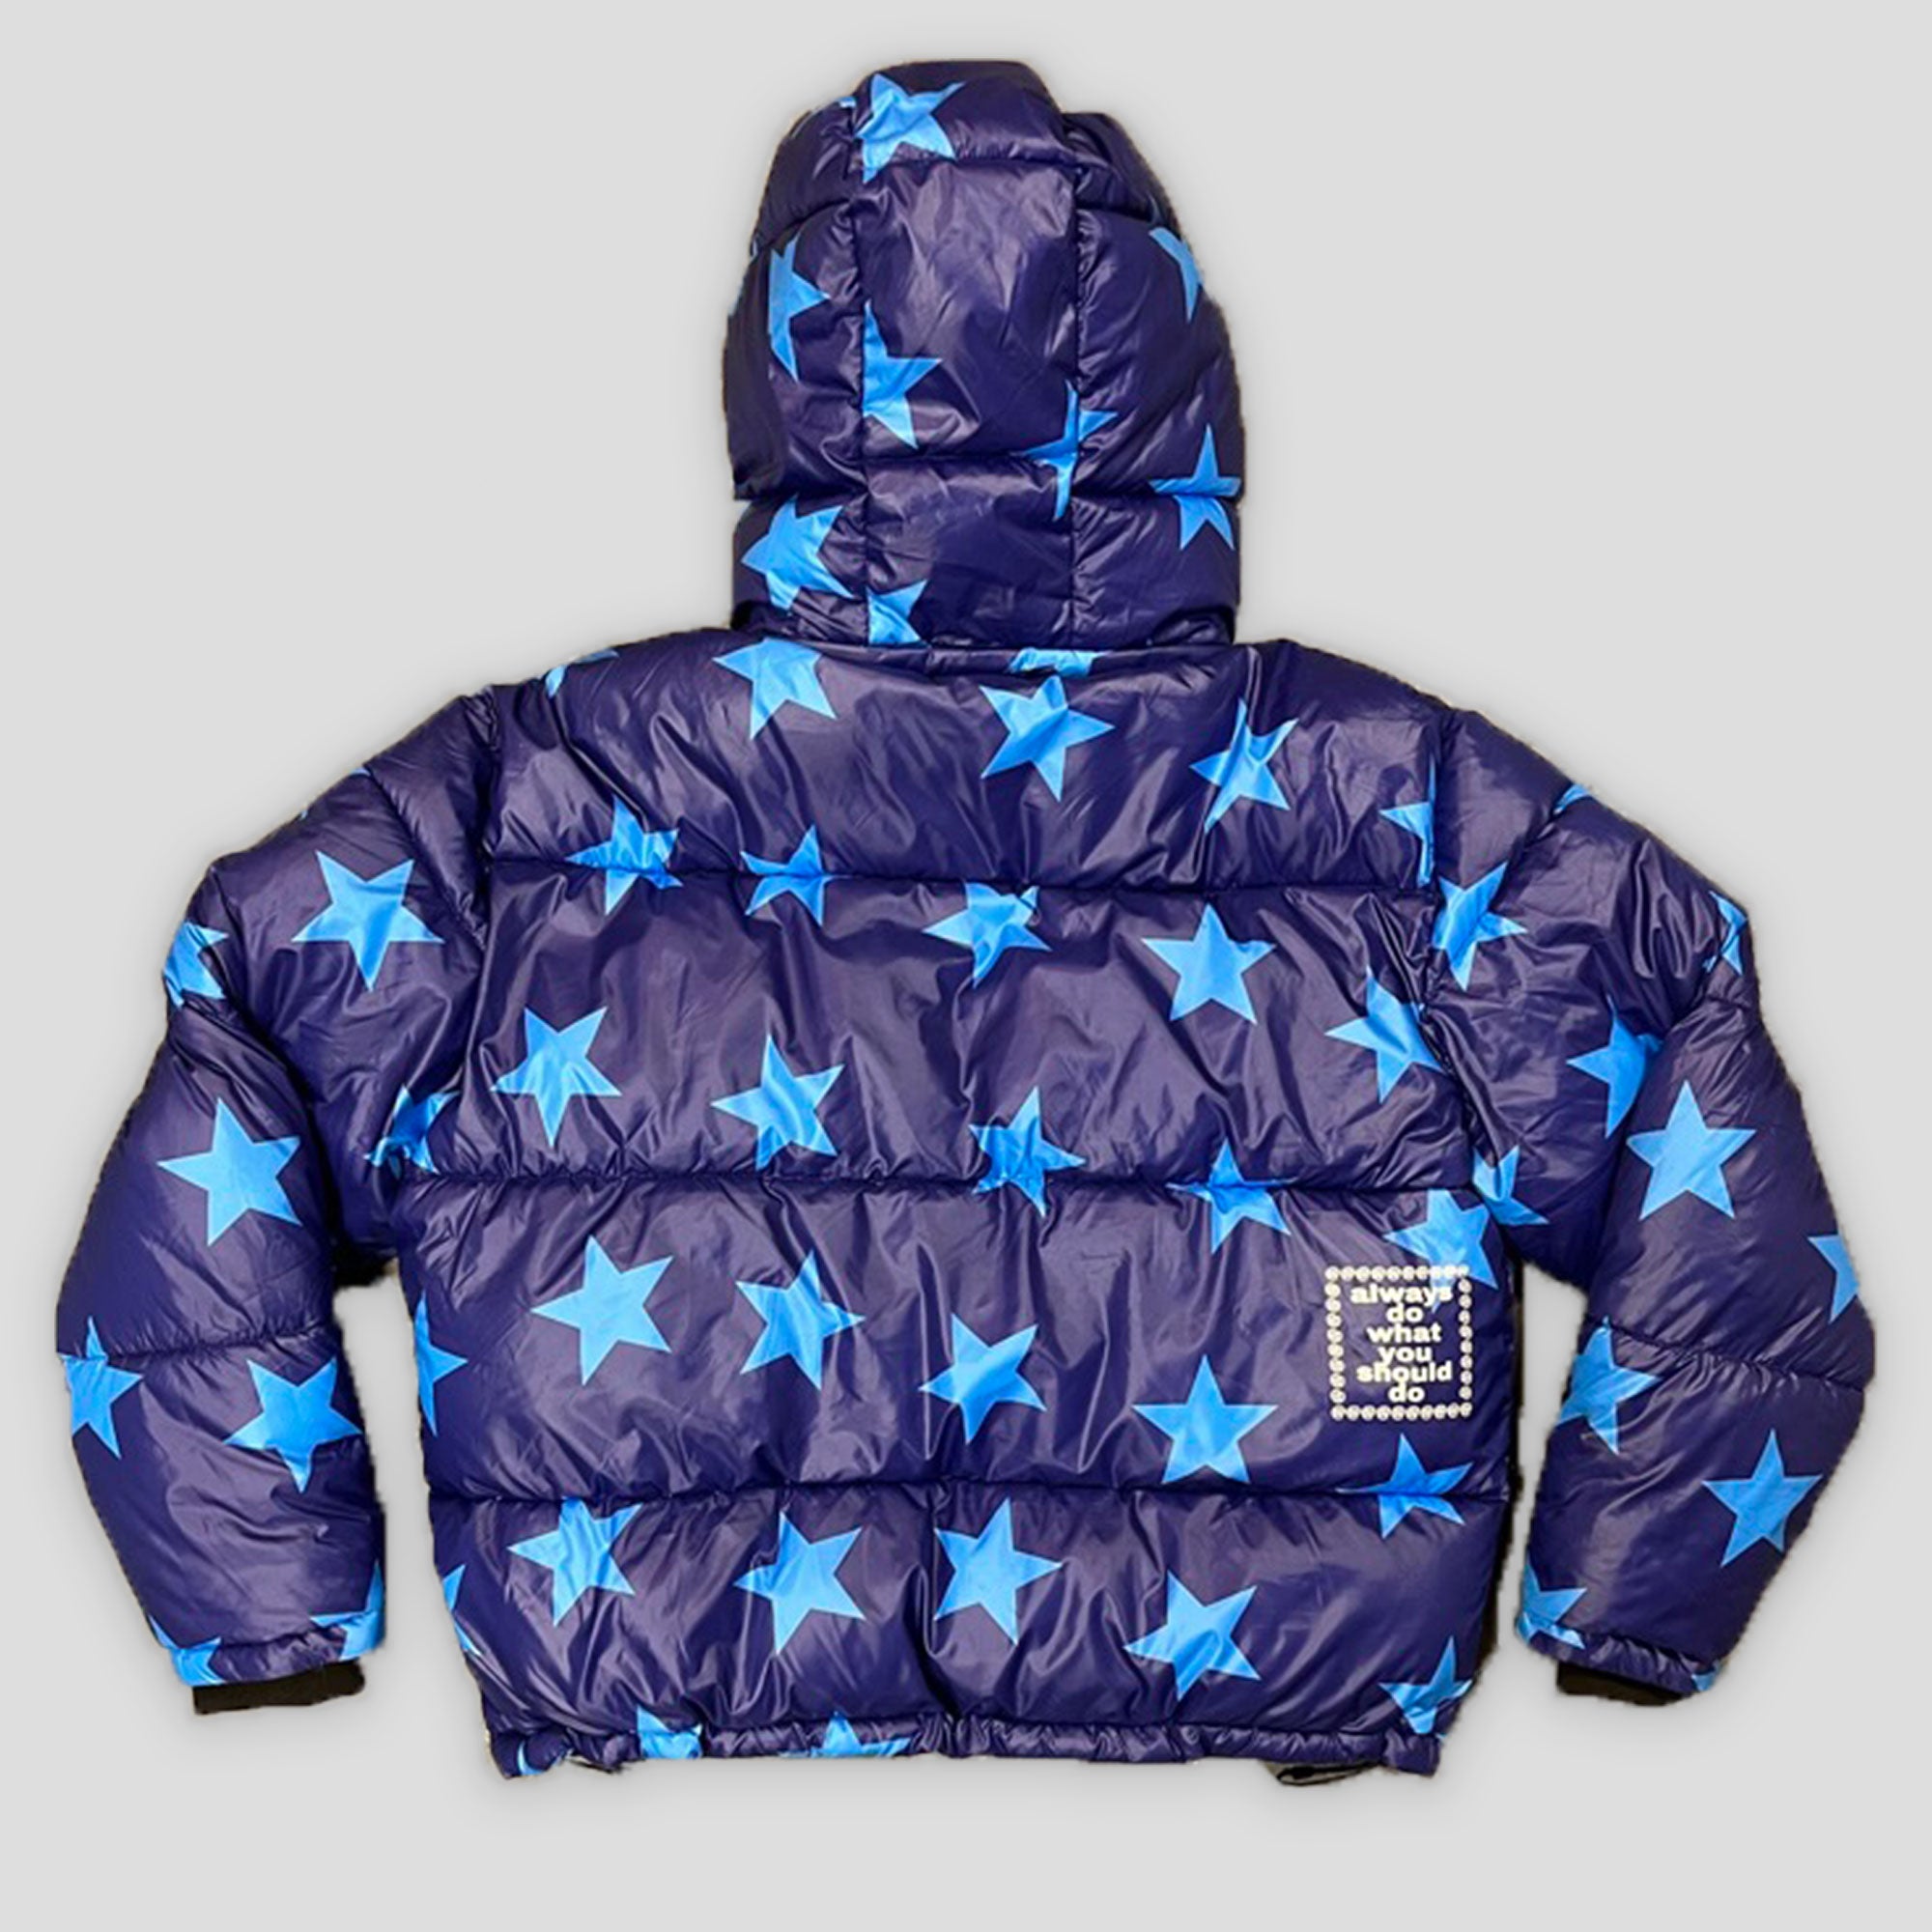 Always Do What You Should Do Superstar Puffa Jacket - Navy